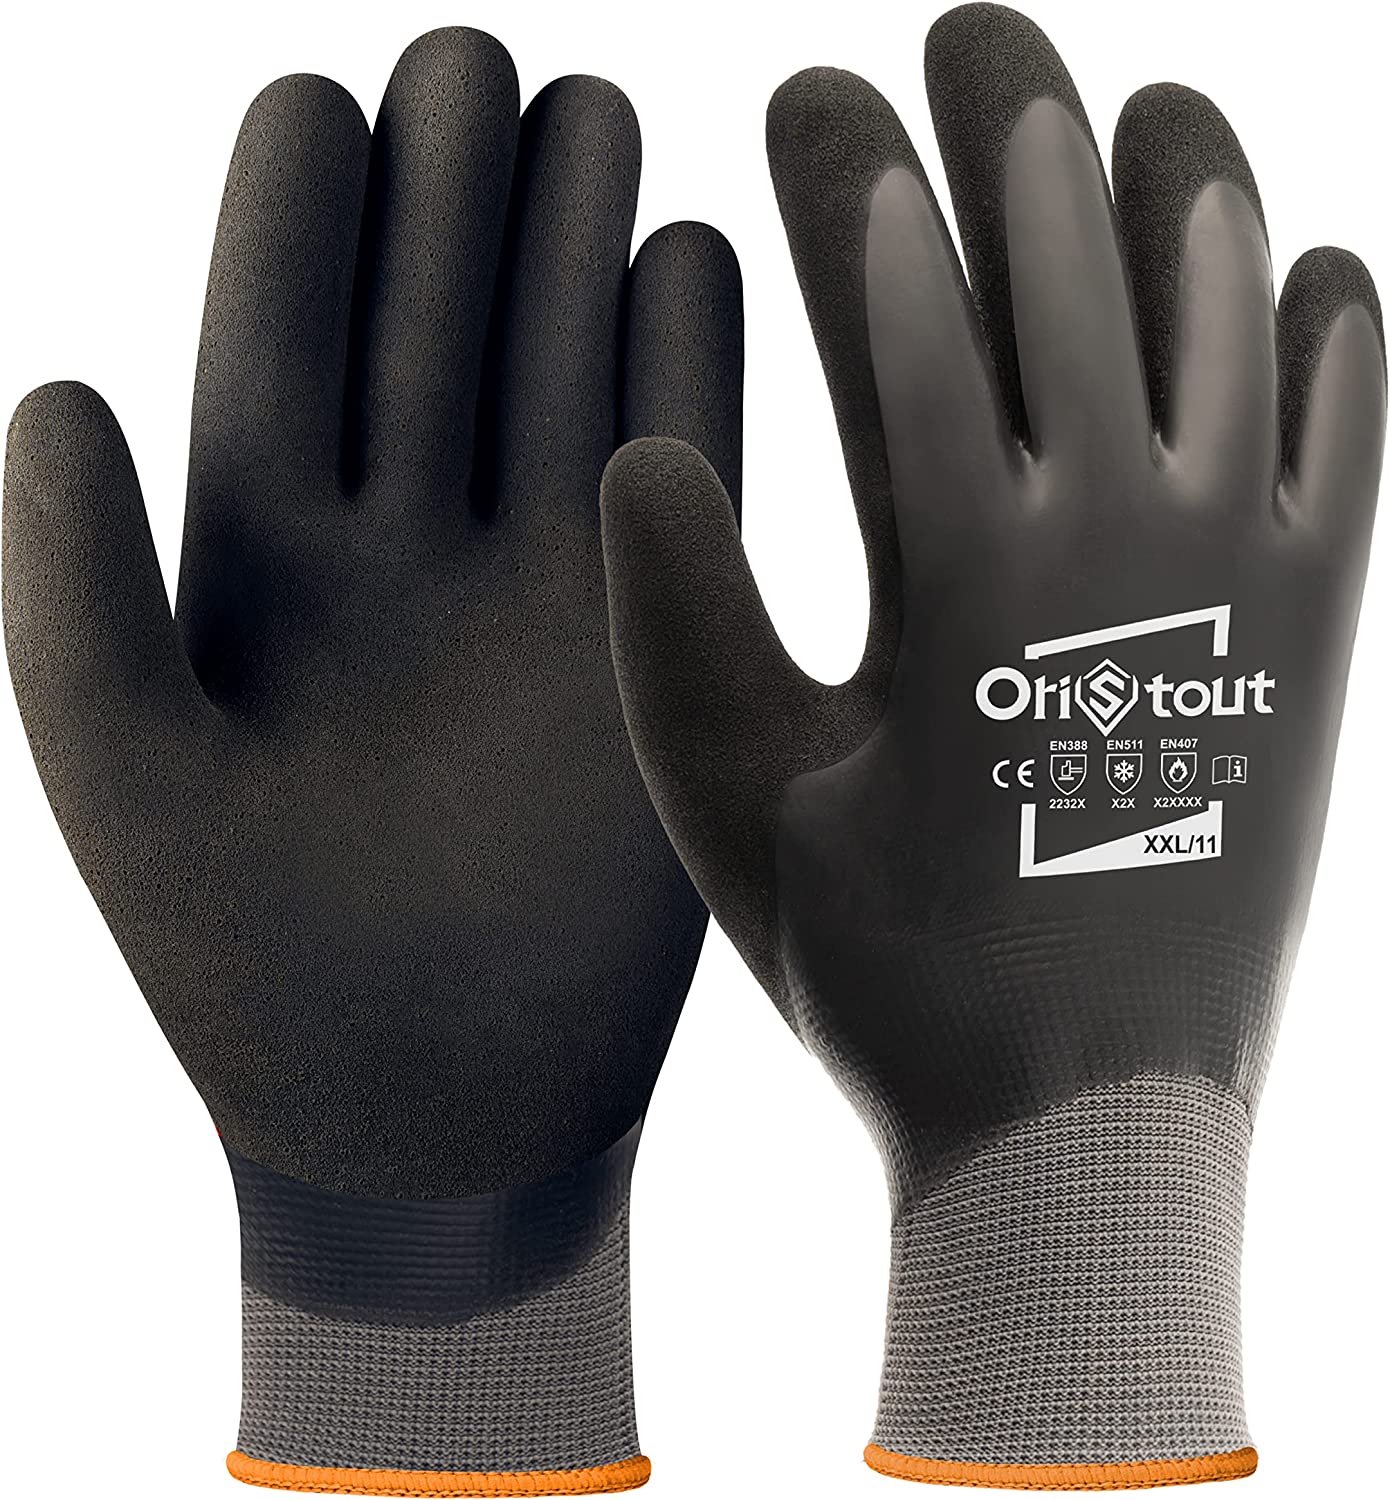 OriStout Winter Work Gloves for Men and Women, Touchscreen, Waterproof Gloves for Working in Freezer, Fishing and Gardening, The, Grey